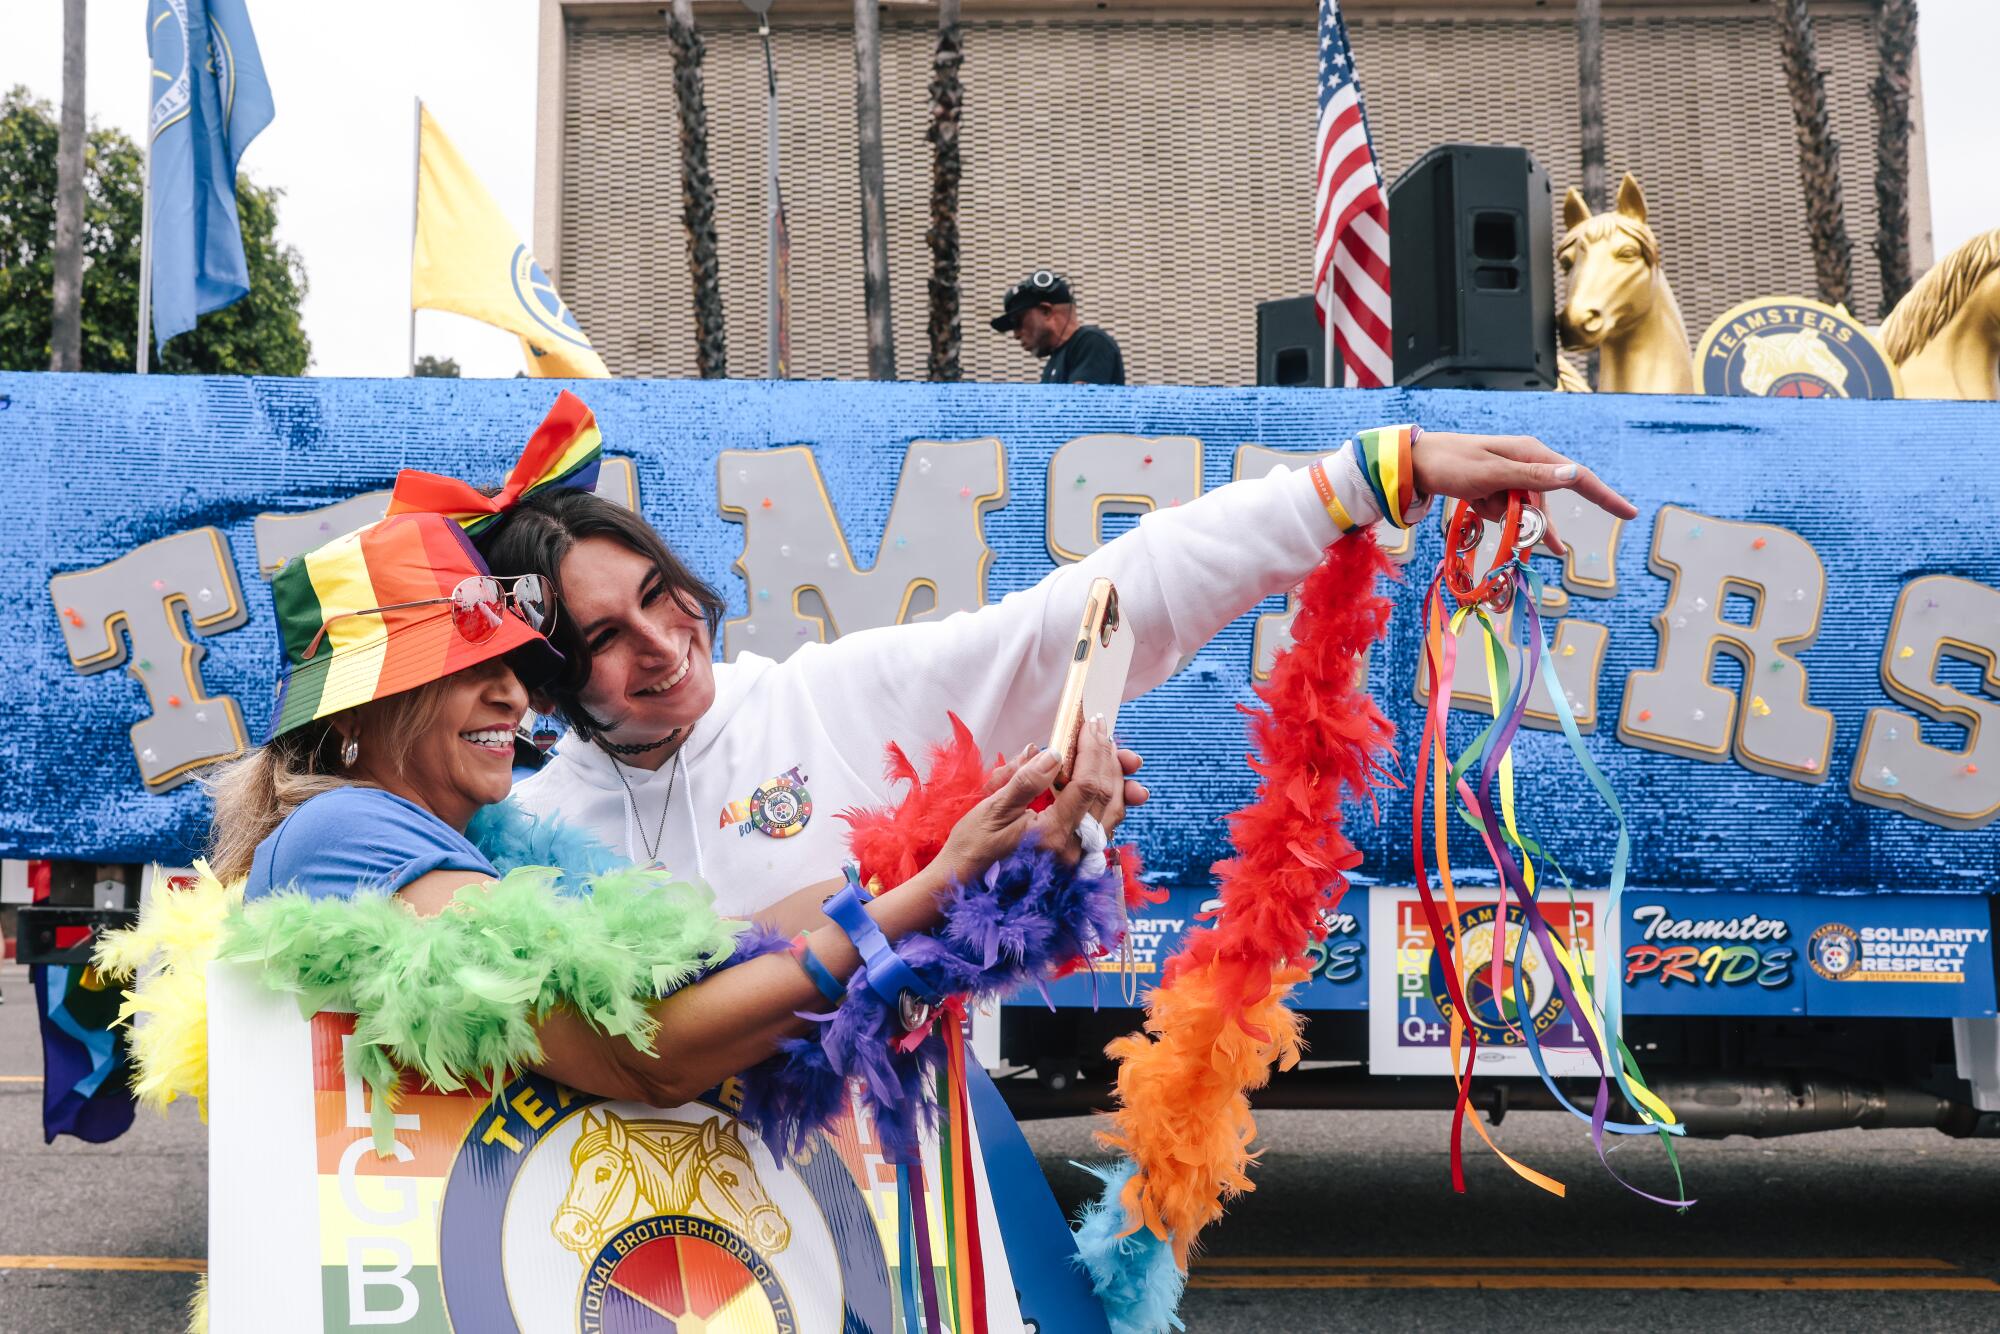 Katherina Esquerra and daughter Riley Kelleher pose for a photograph together with the Teamsters Local 399 float.